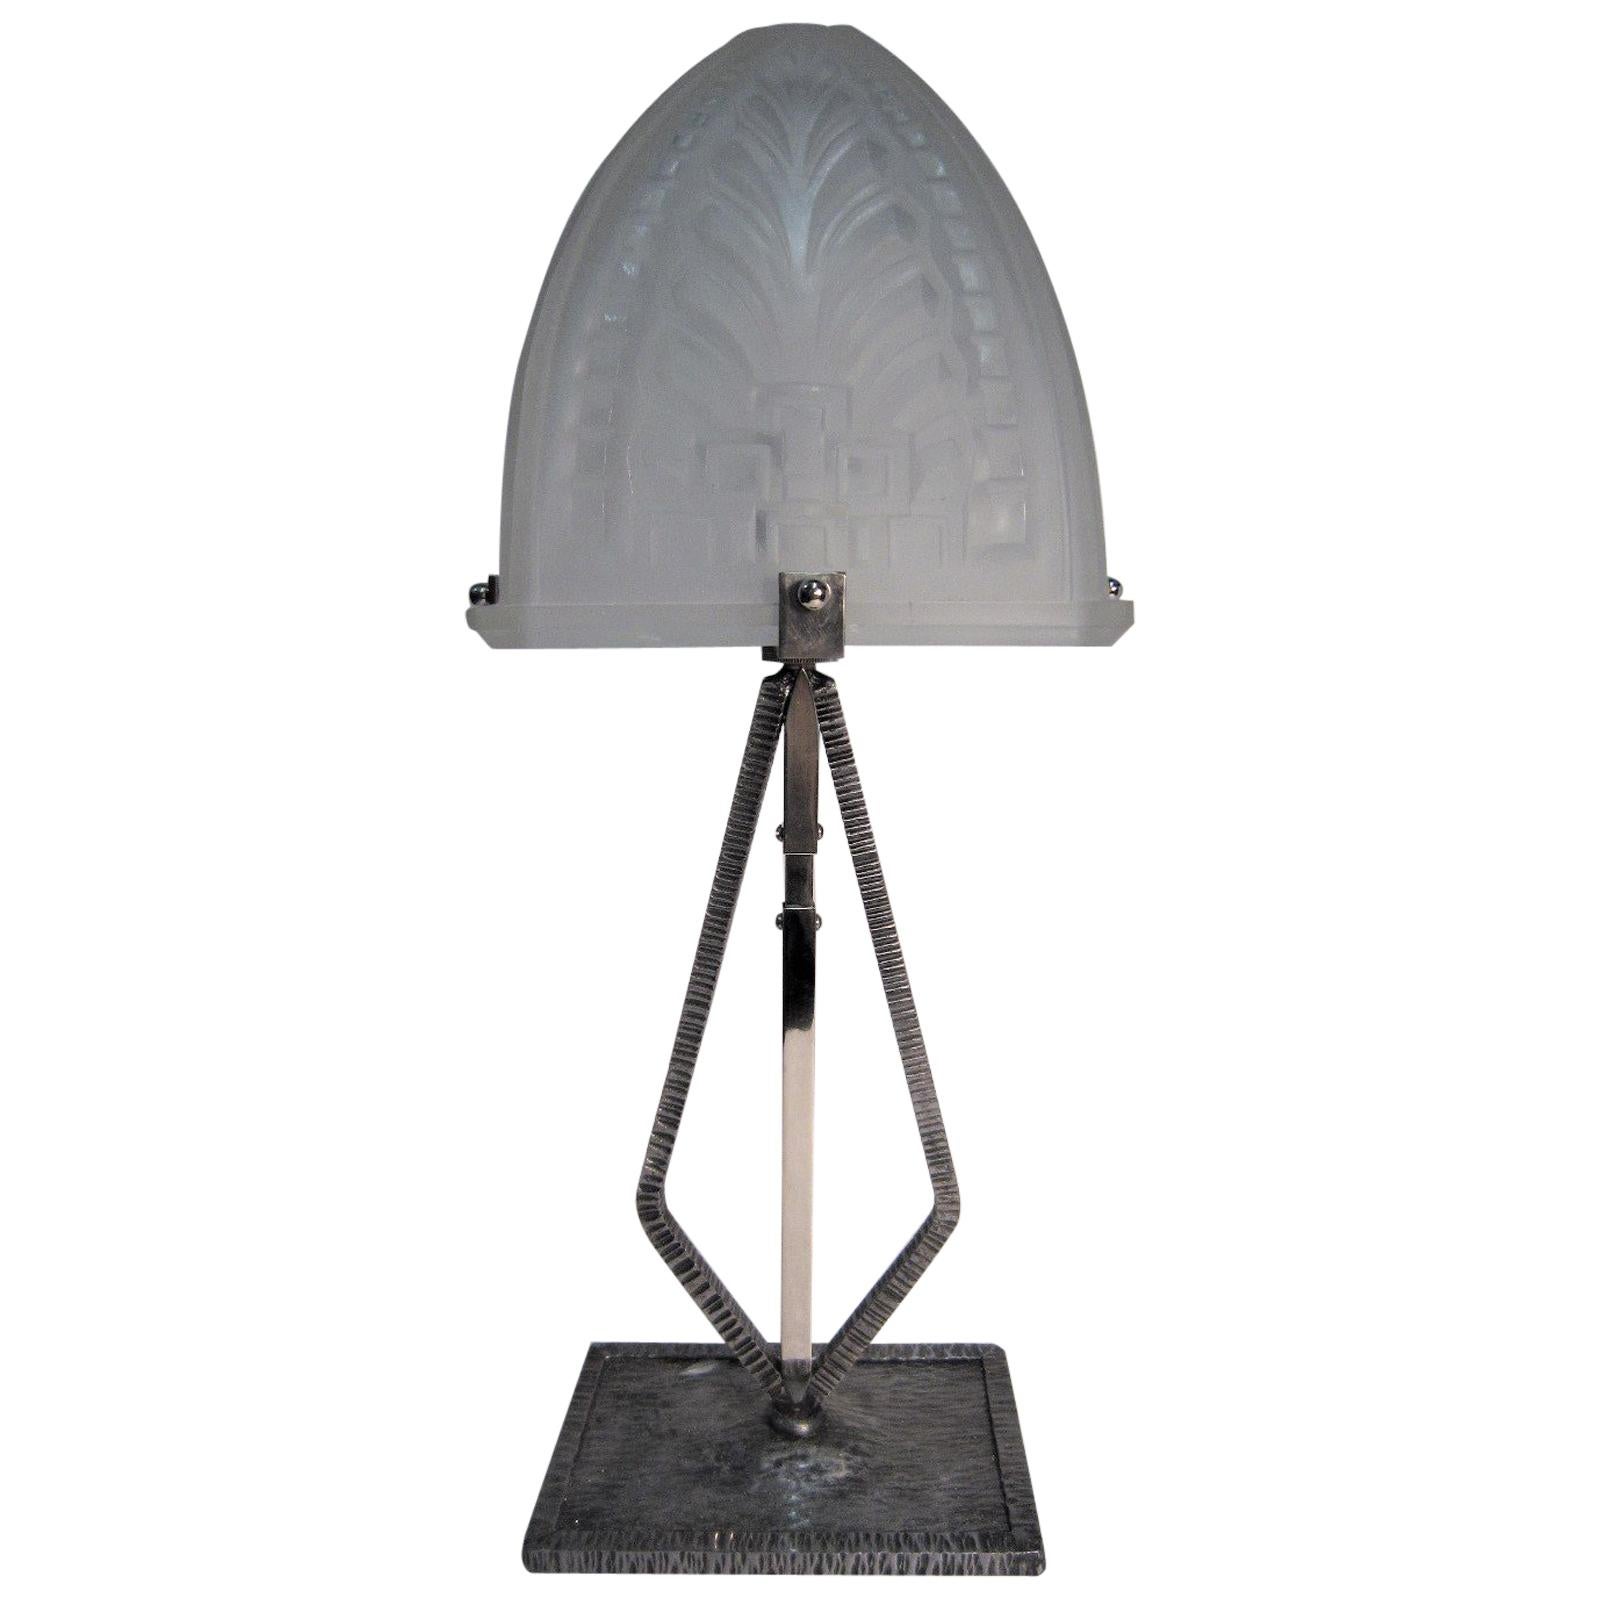 Narrow, Rectangular French Modernist Table Lamp, Hammered Iron and Art Glass